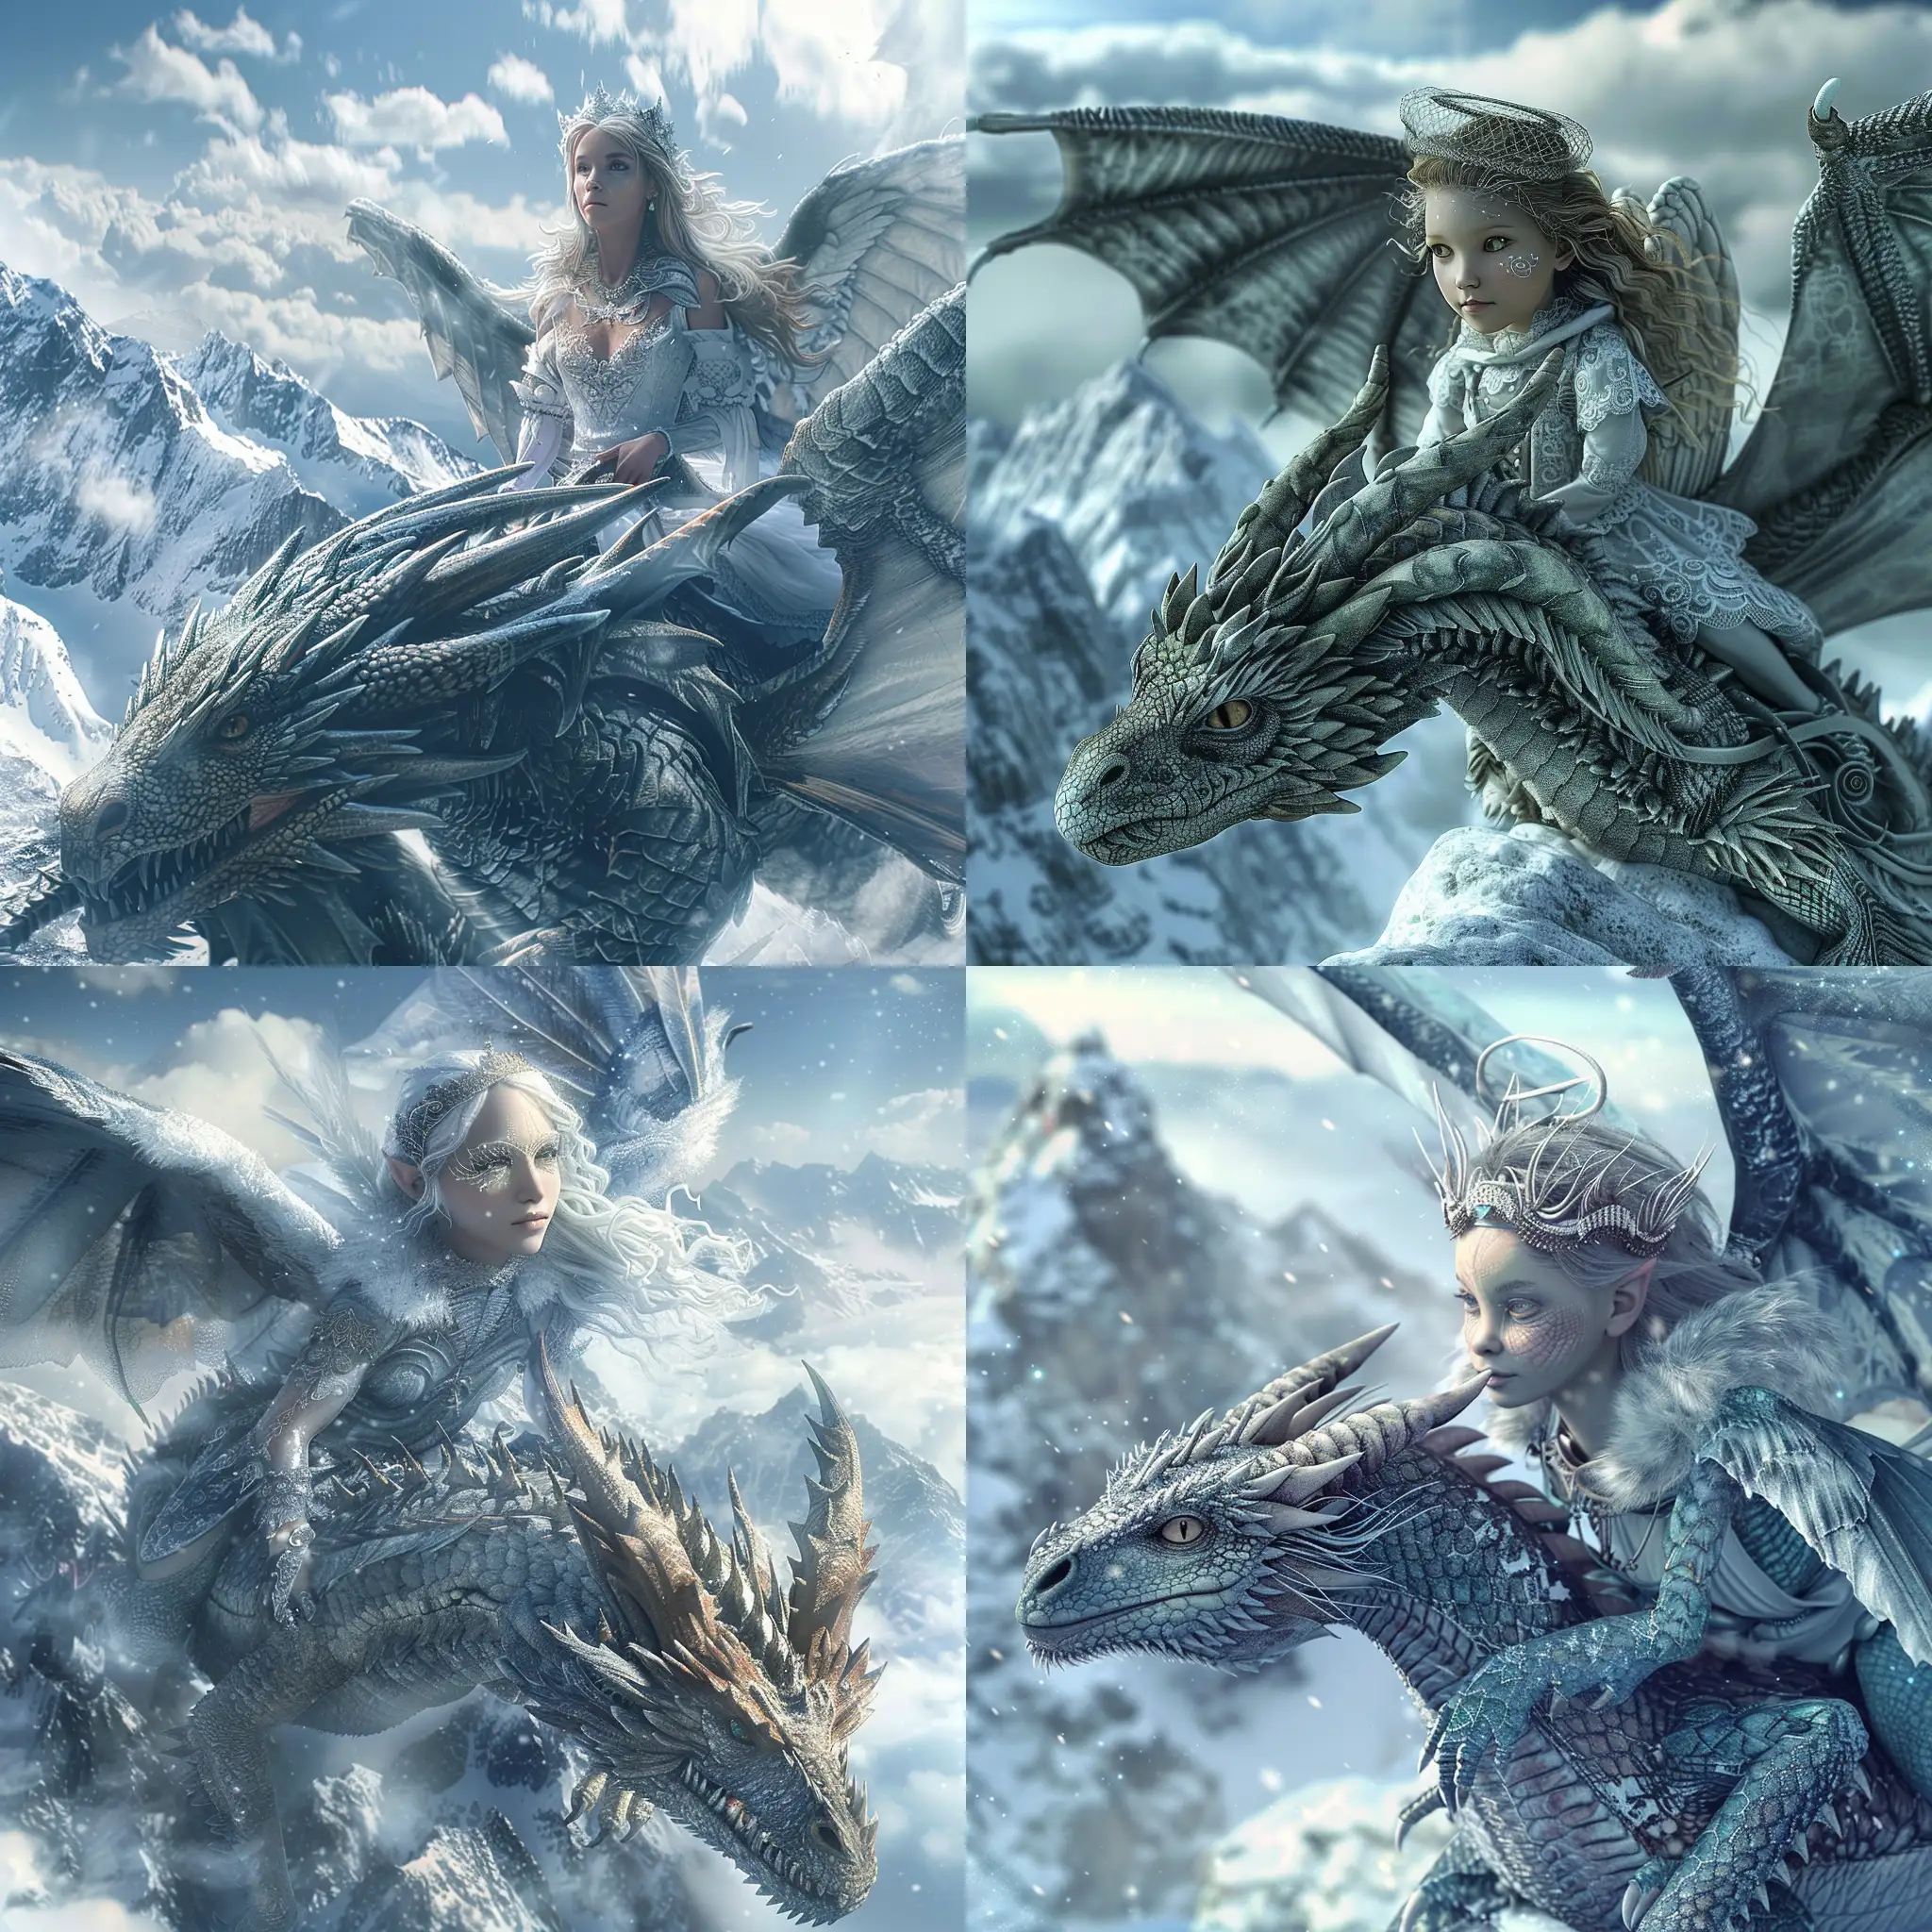 Enchanting-Angel-Riding-Dragon-Over-Snowy-Mountain-Peaks